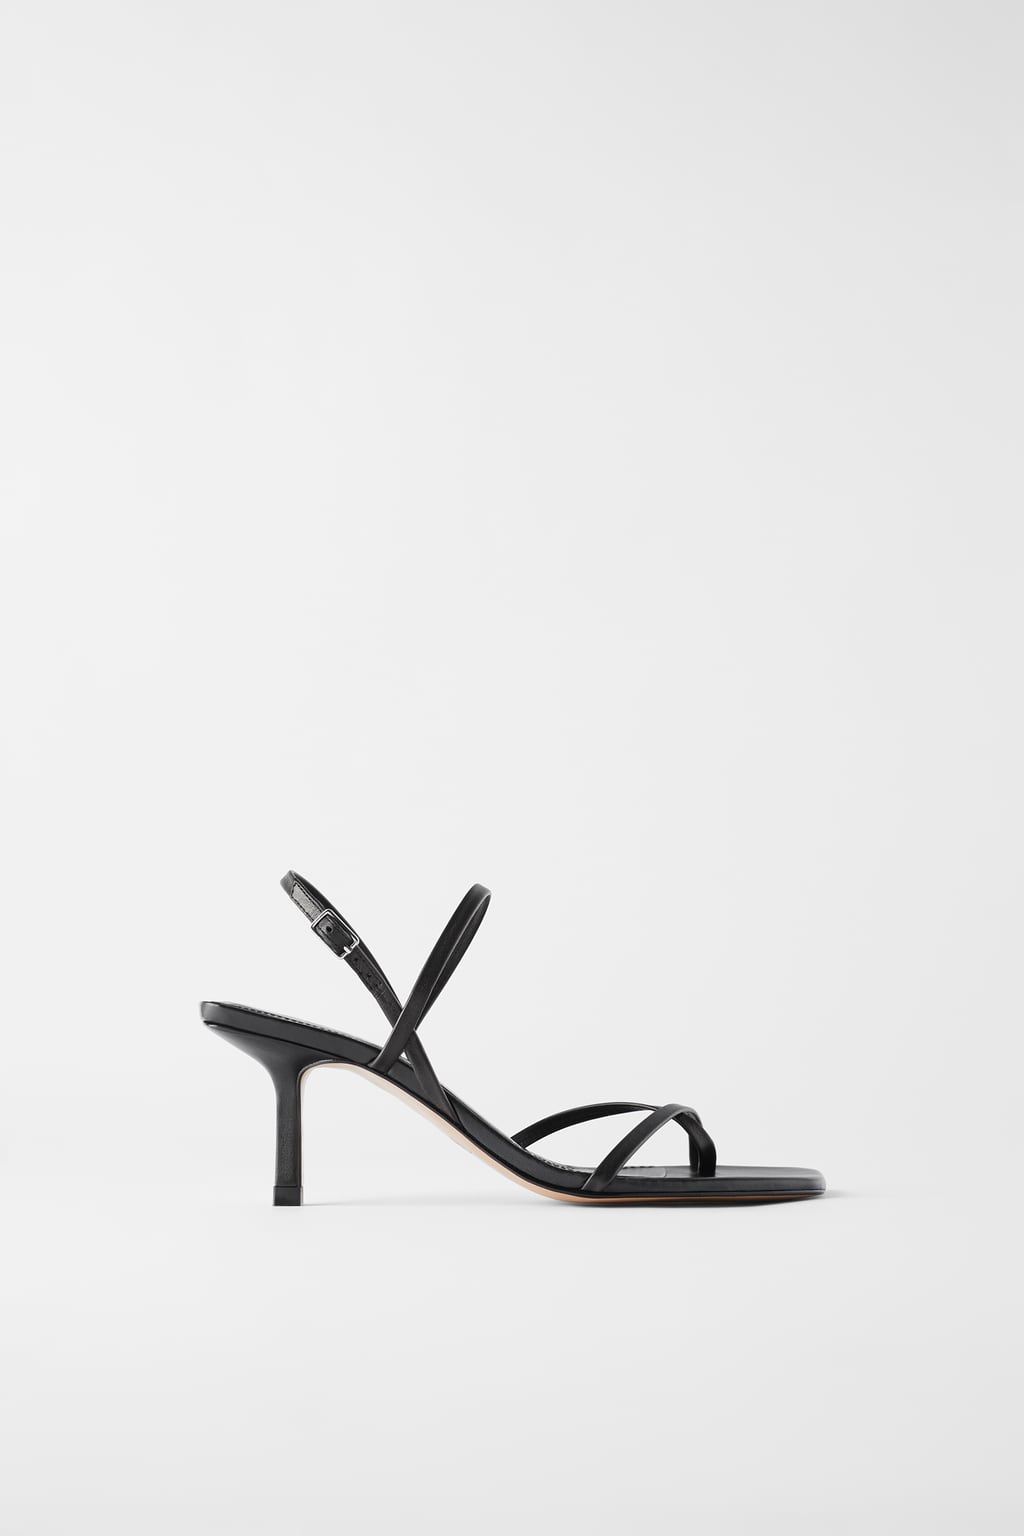 topshop ray strappy sandals